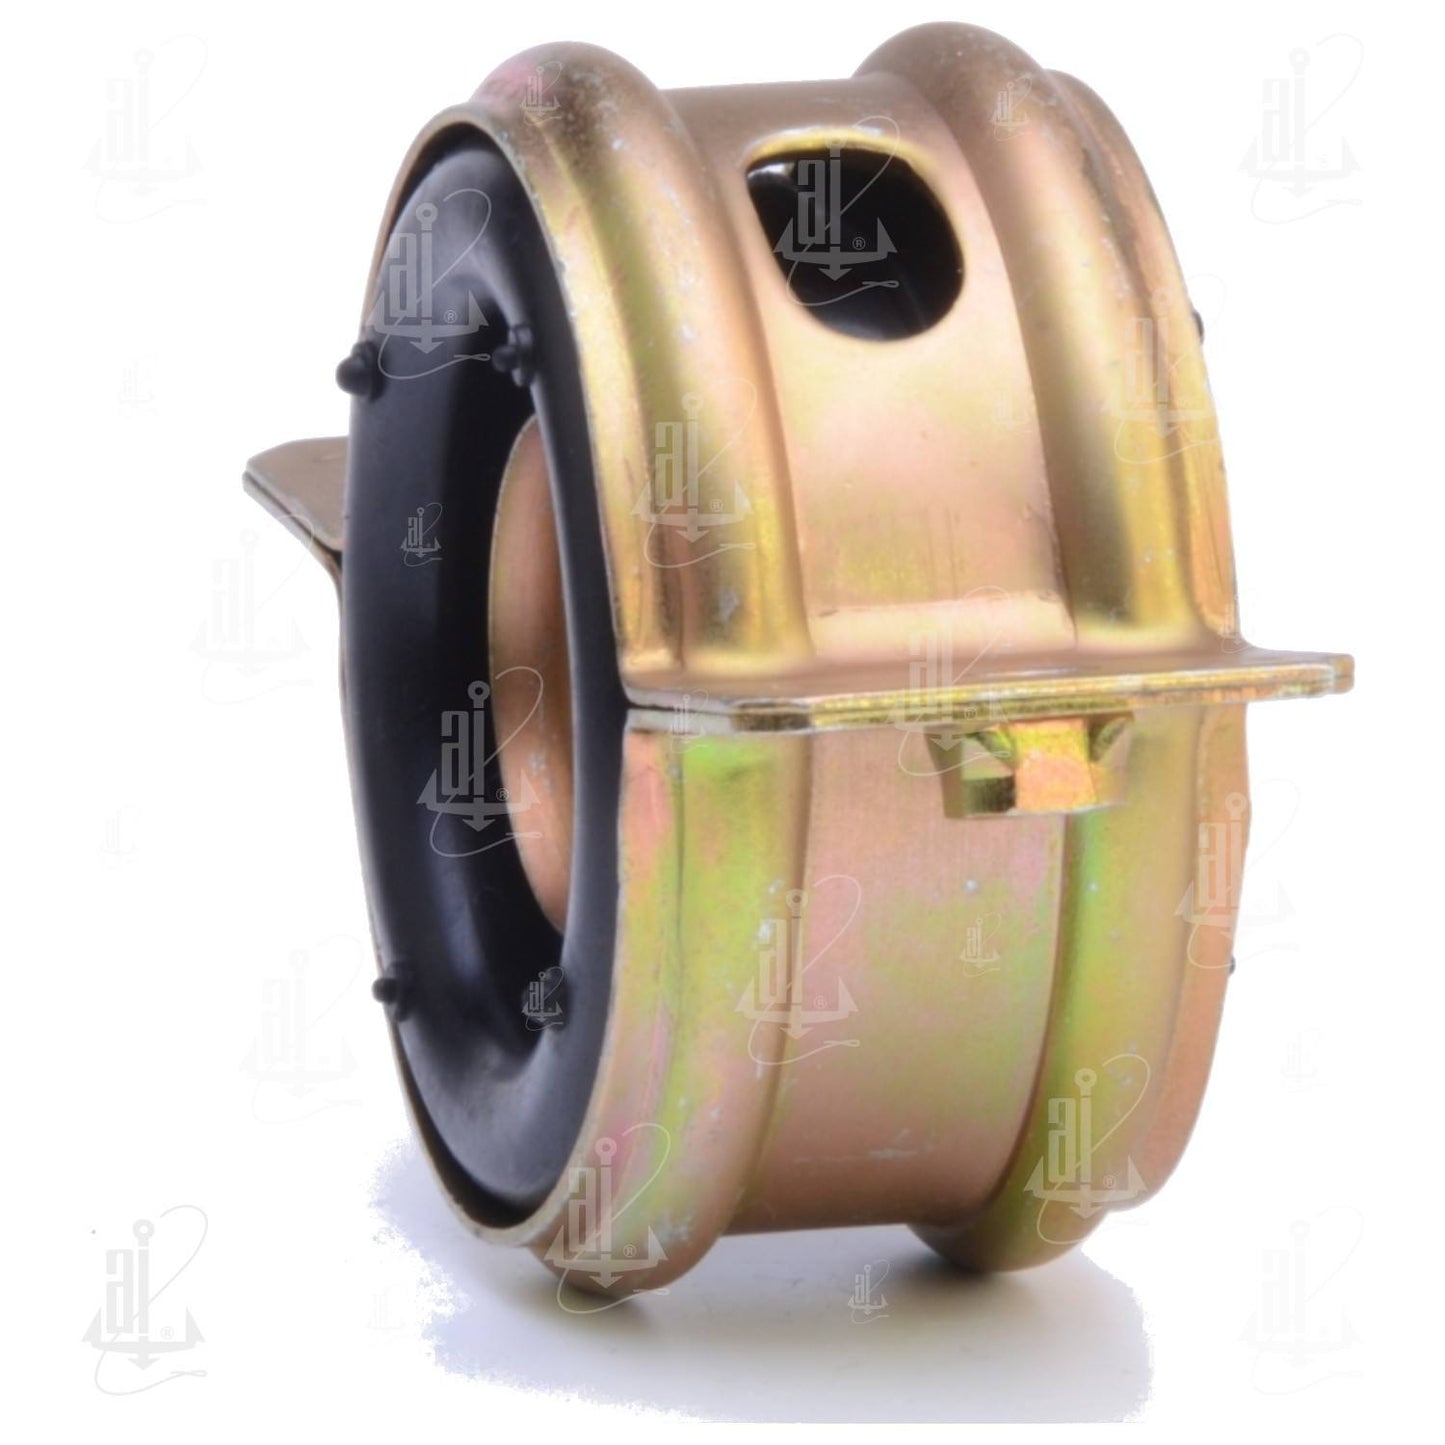 Left View of Center Drive Shaft Center Support Bearing ANCHOR 8532